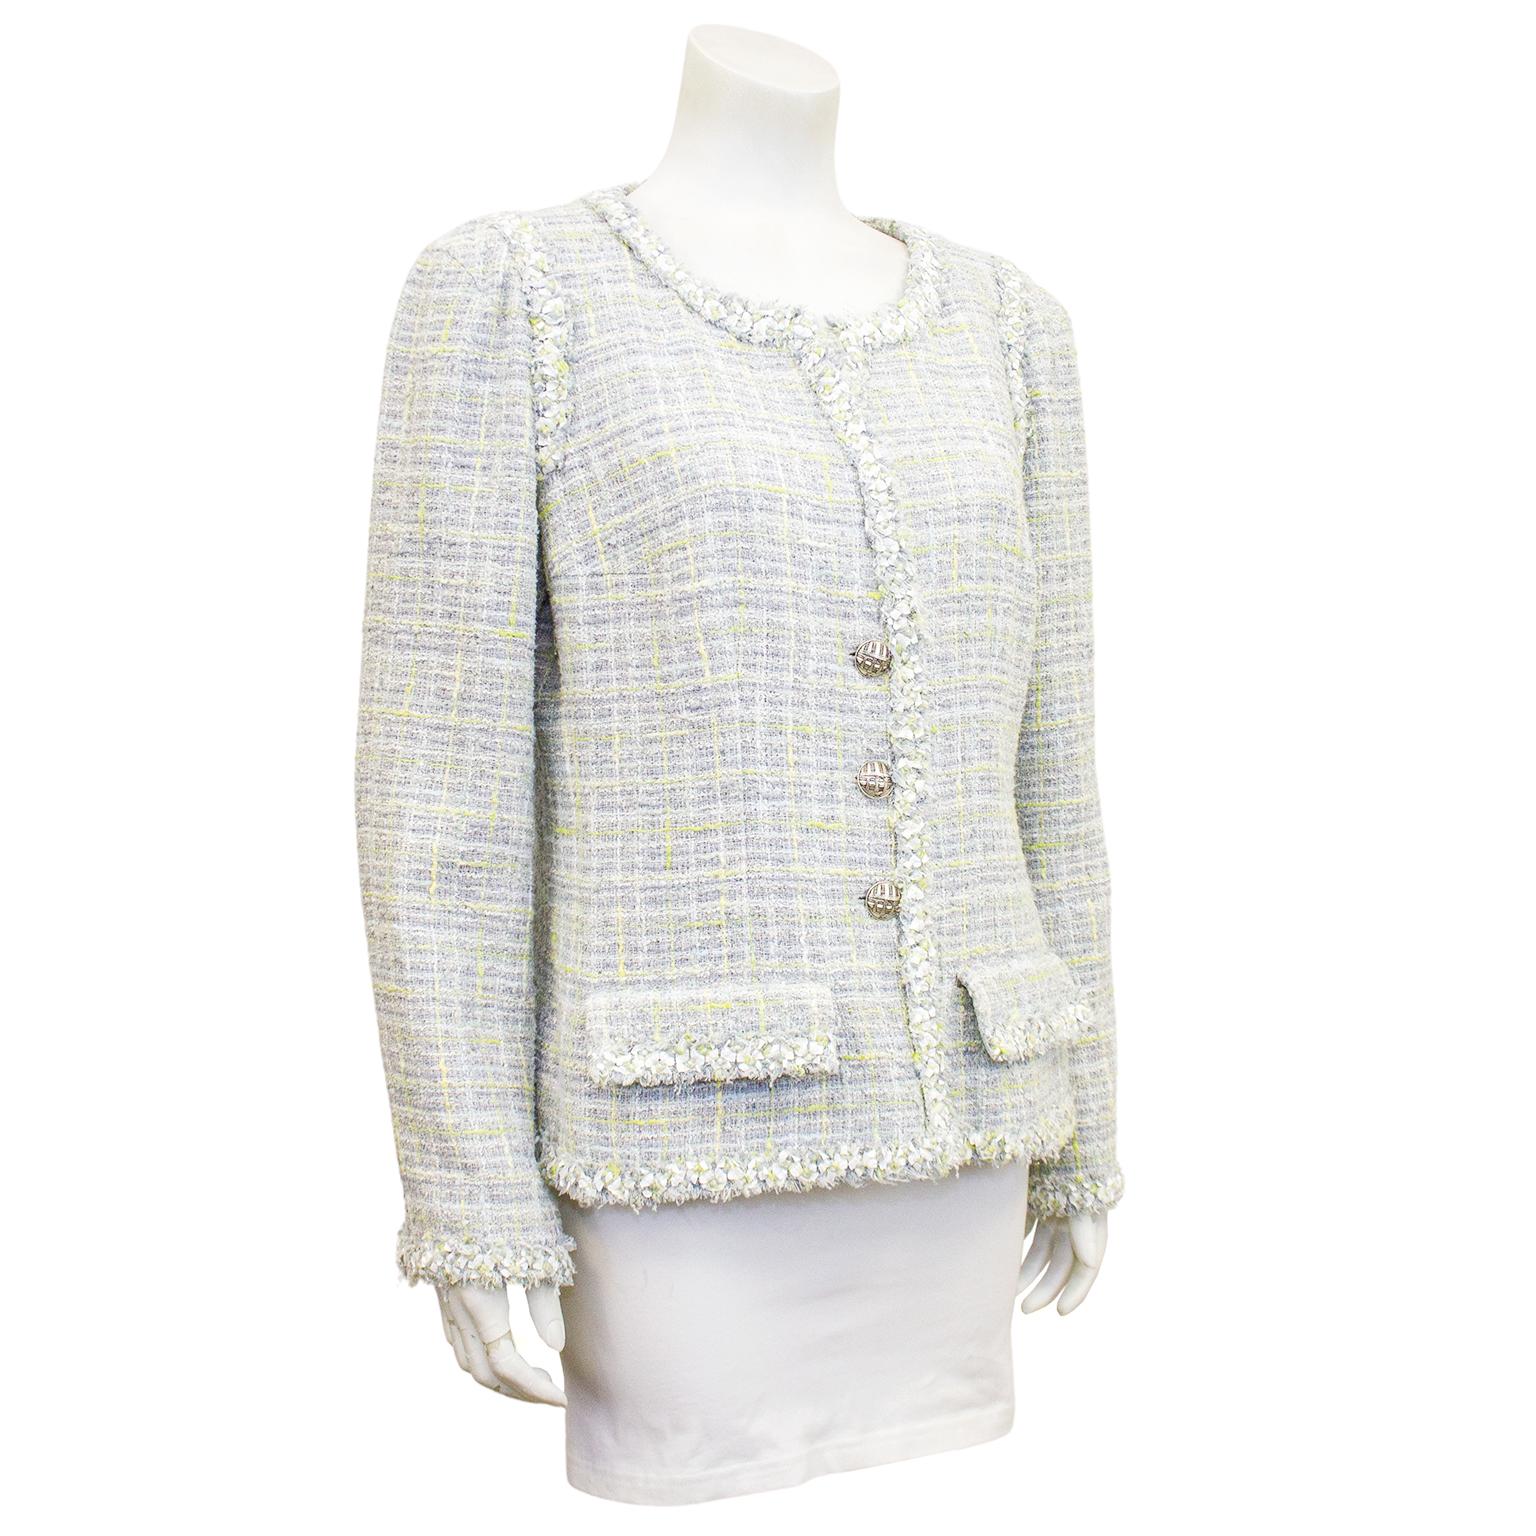 Classic Chanel jacket from the spring 2009 jacket. Grey and very pale blue bouclé tweed with contrasting threads in pale green and pale yellow. Short fringe trim. Large silver buttons engraved with the facade of a Chanel store. Faux flap pockets at